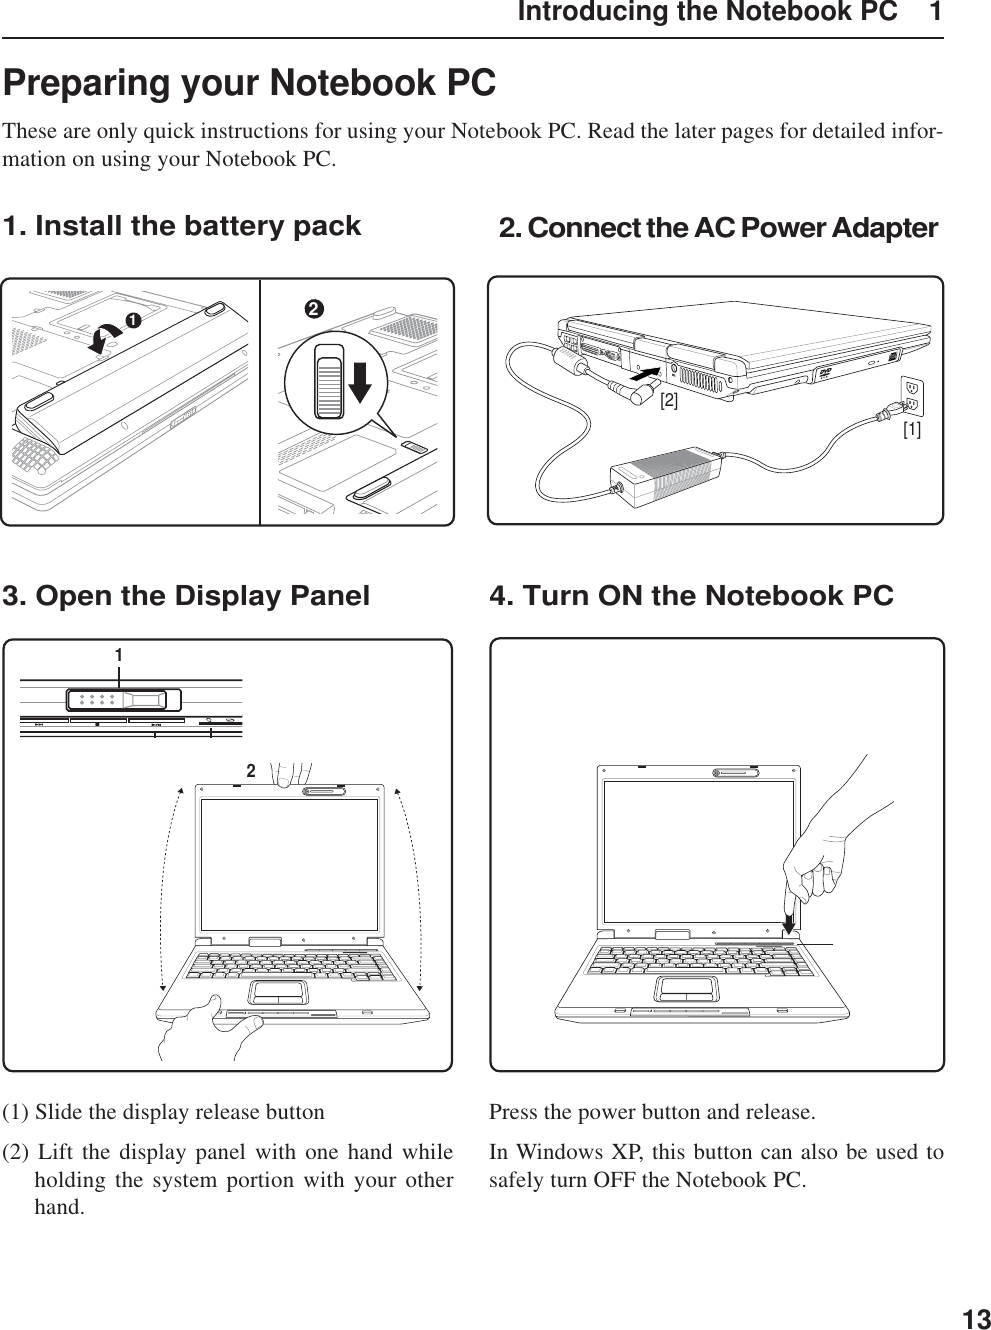 13Introducing the Notebook PC    1Preparing your Notebook PCThese are only quick instructions for using your Notebook PC. Read the later pages for detailed infor-mation on using your Notebook PC.1. Install the battery pack3. Open the Display Panel 4. Turn ON the Notebook PC2. Connect the AC Power AdapterPress the power button and release.In Windows XP, this button can also be used tosafely turn OFF the Notebook PC.(1) Slide the display release button(2) Lift the display panel with one hand whileholding the system portion with your otherhand.[1][2]1221